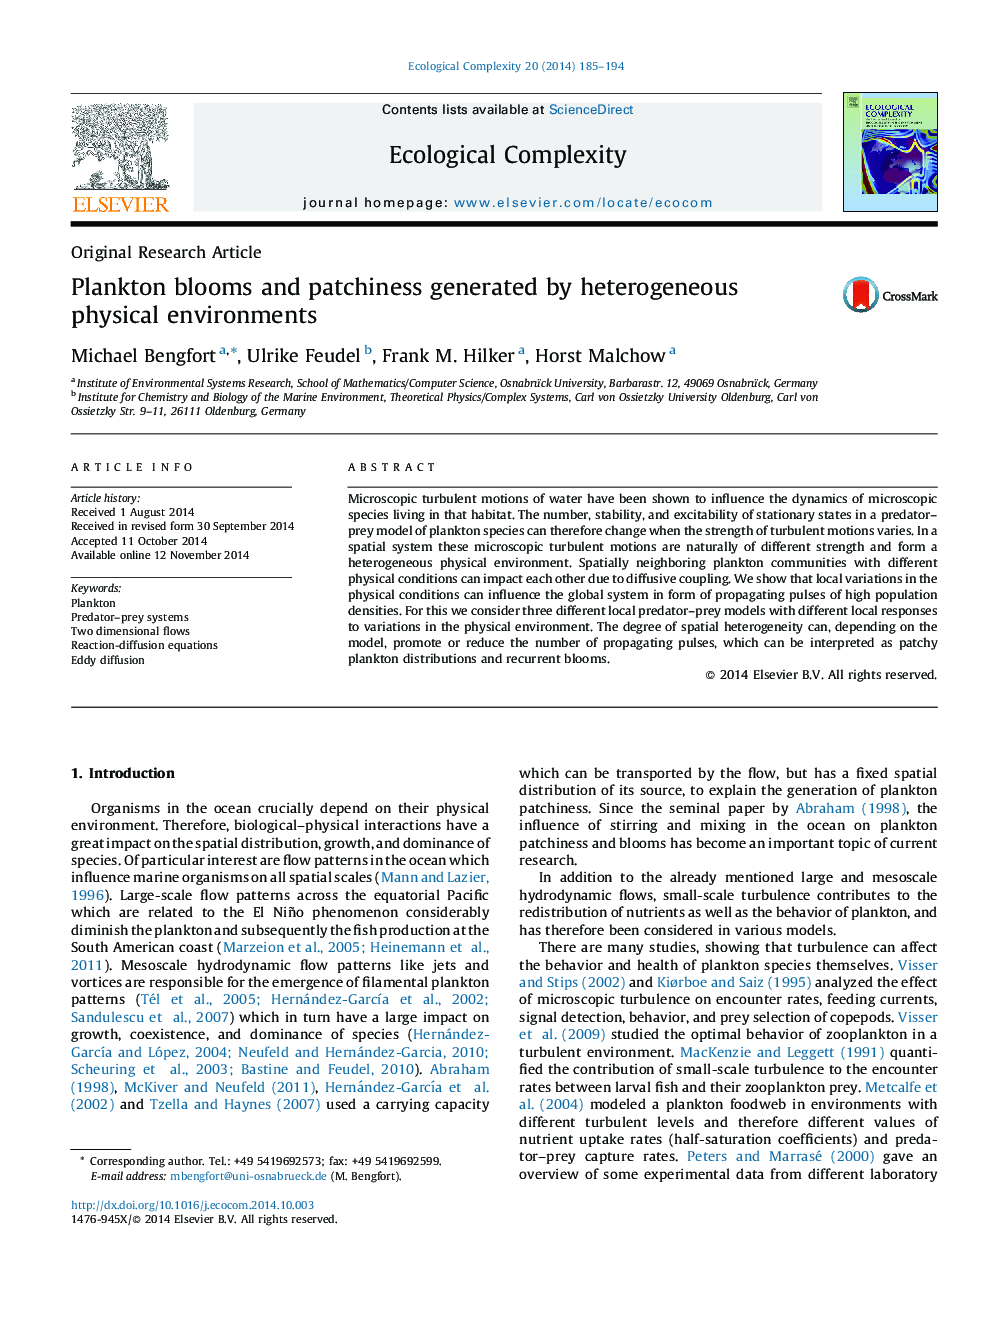 Plankton blooms and patchiness generated by heterogeneous physical environments